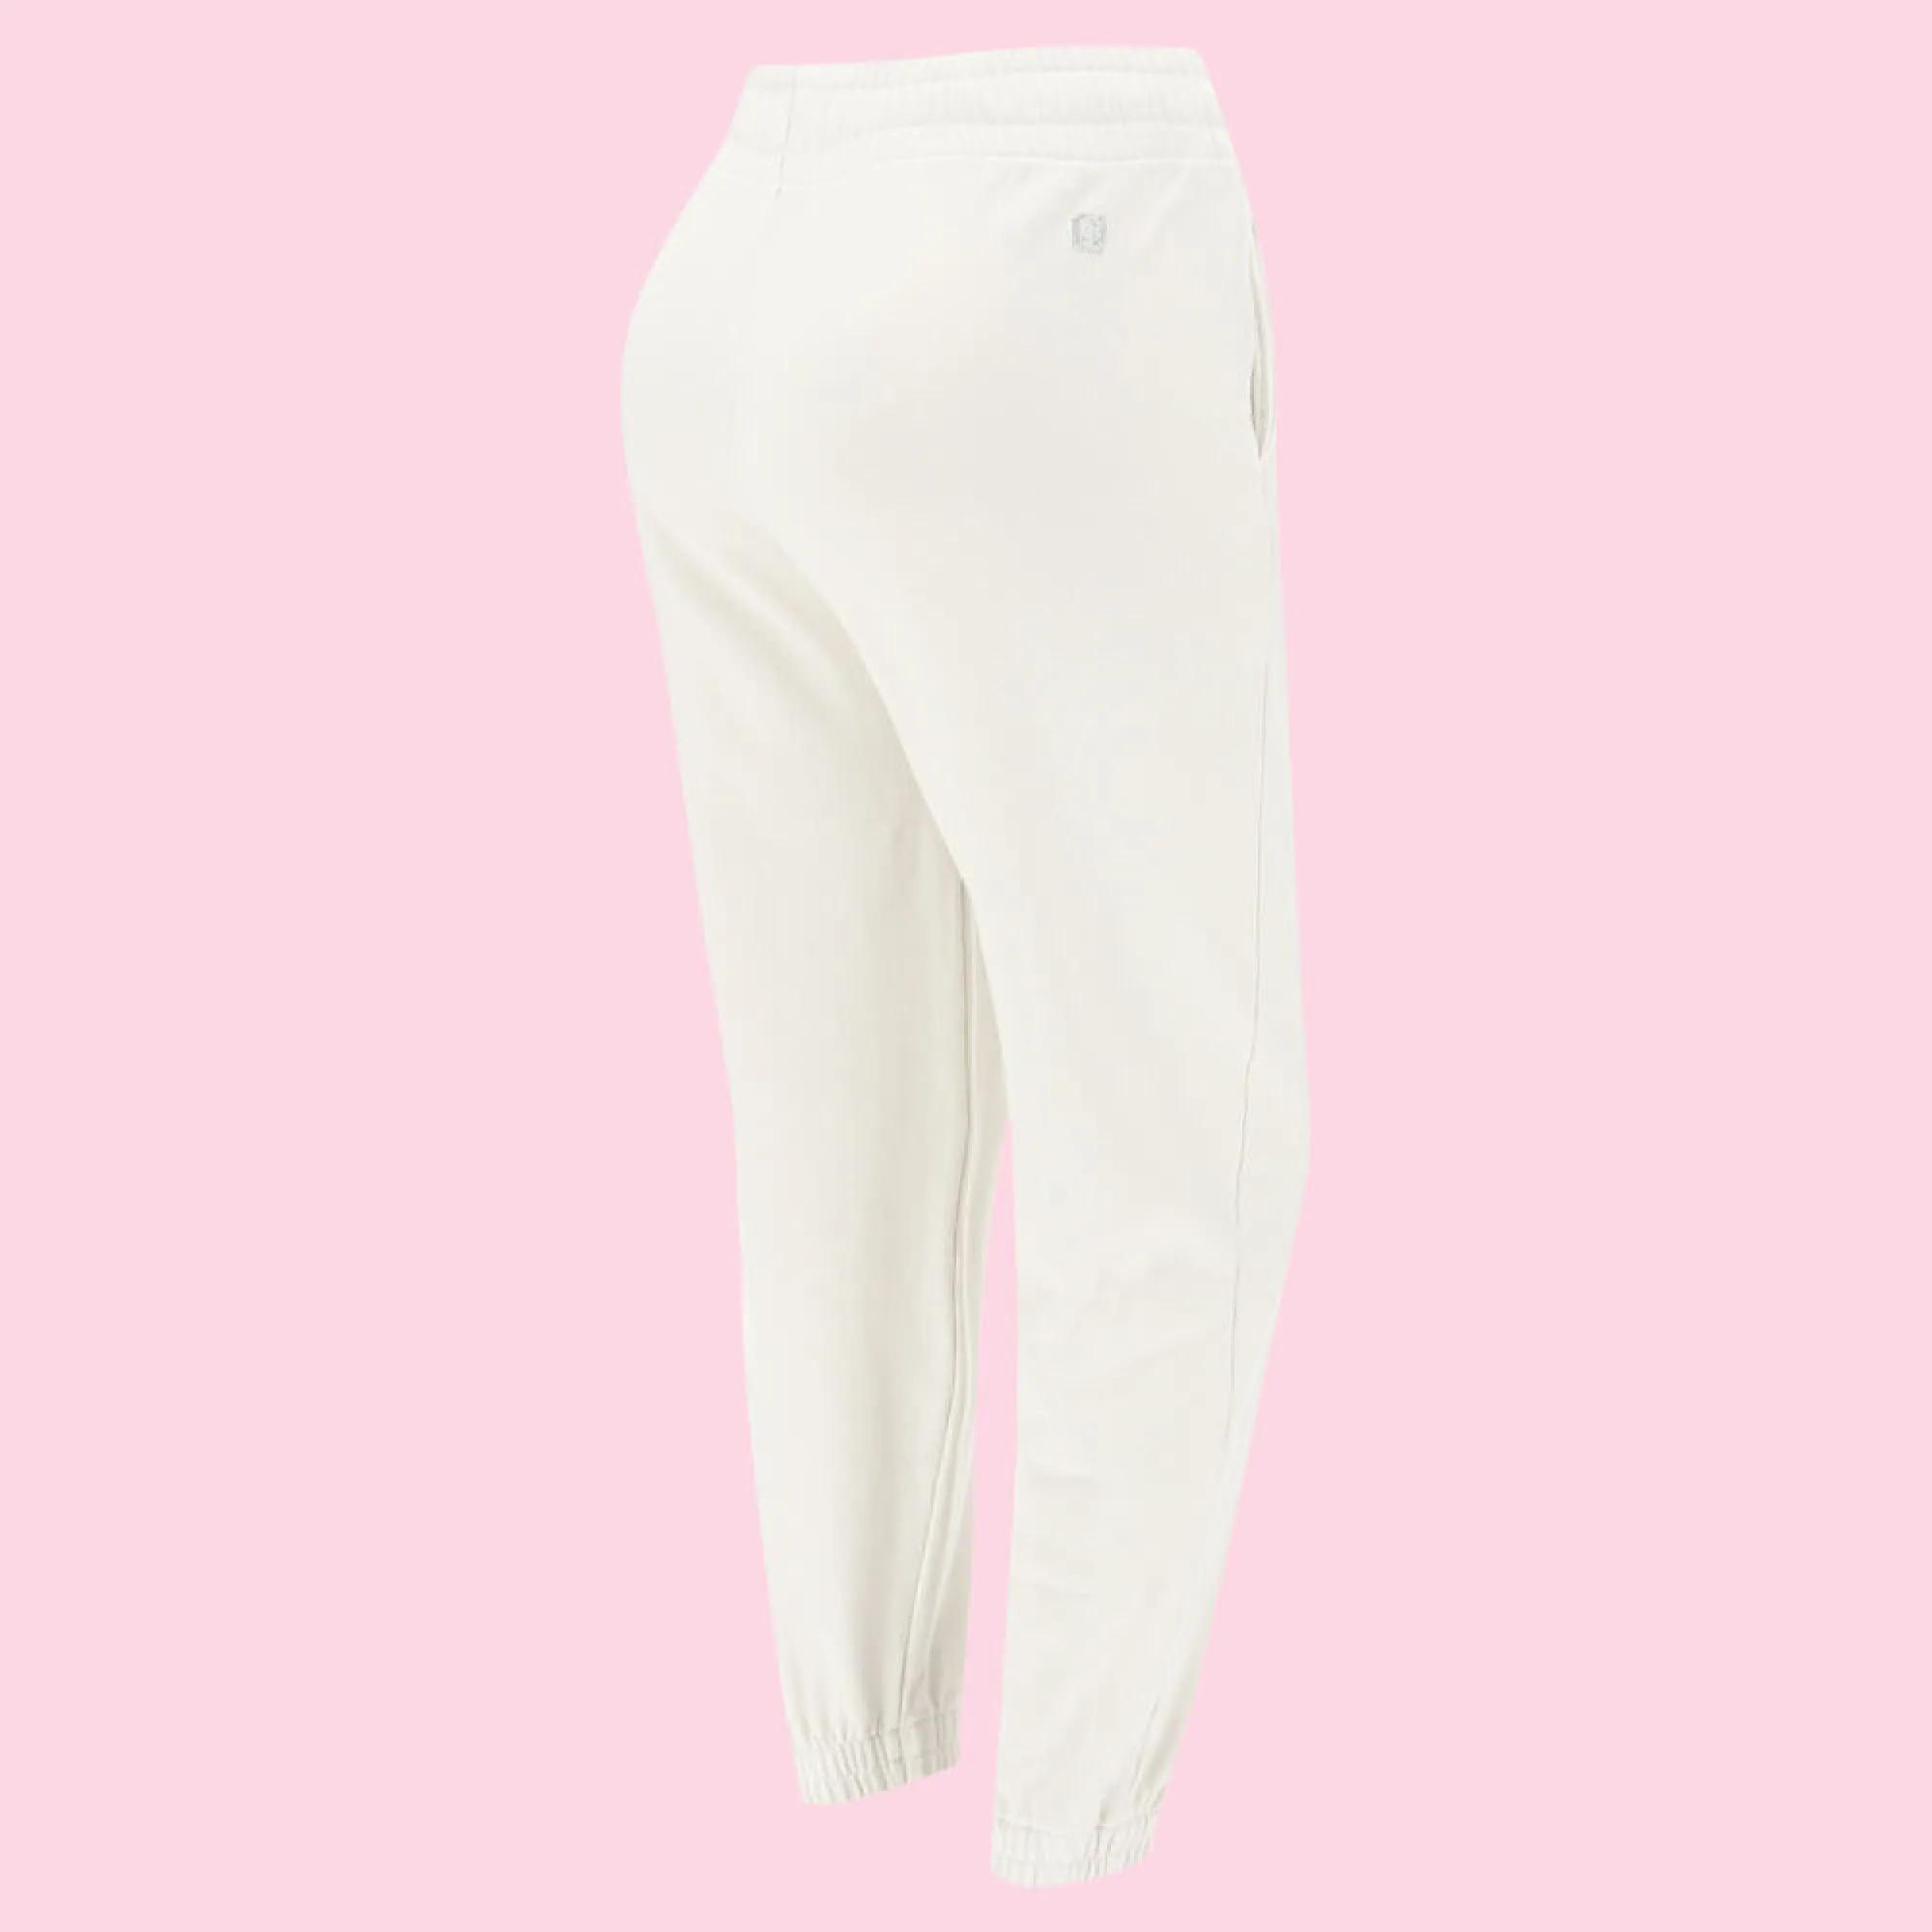 Freddy Lounge Essentials - Jogger - French Terry - Lily White - I35X